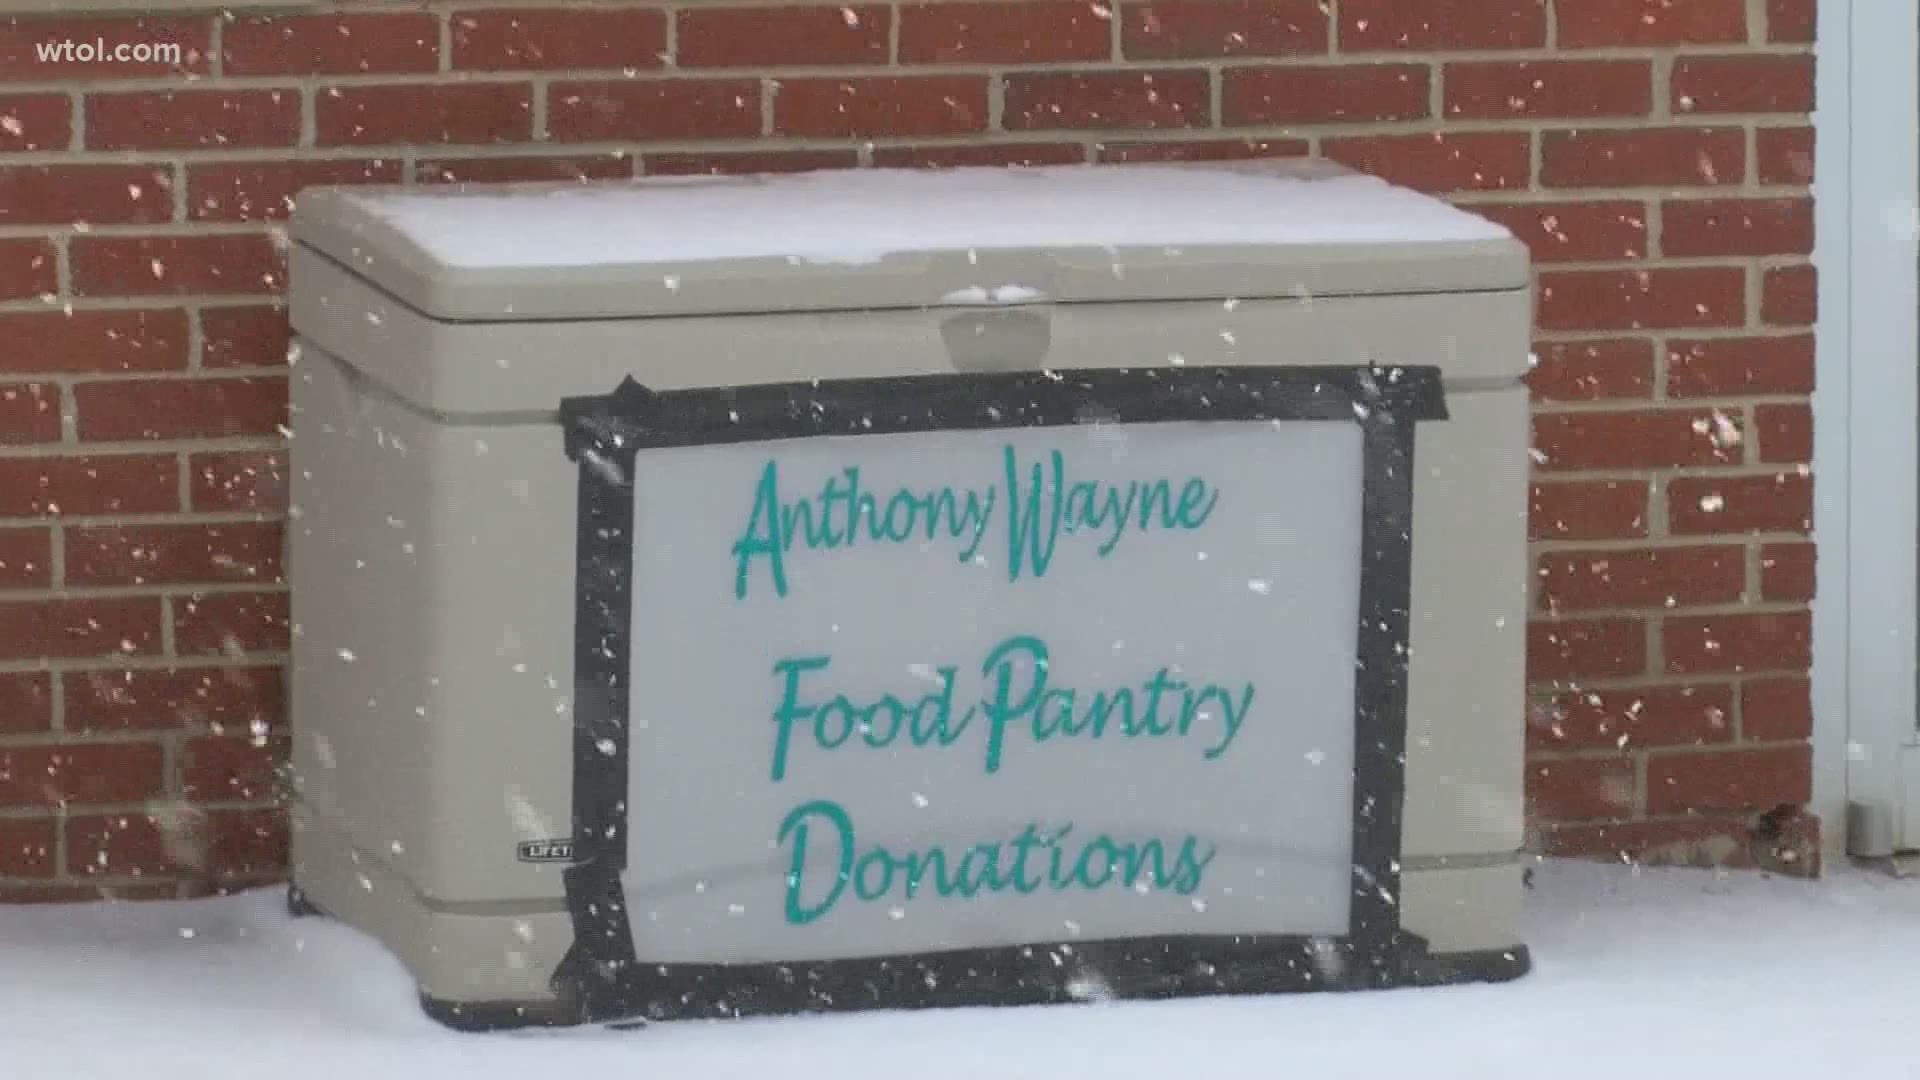 People who have never sought food aid before are finding themselves in an unfamiliar situation that the food pantry aims to aid.